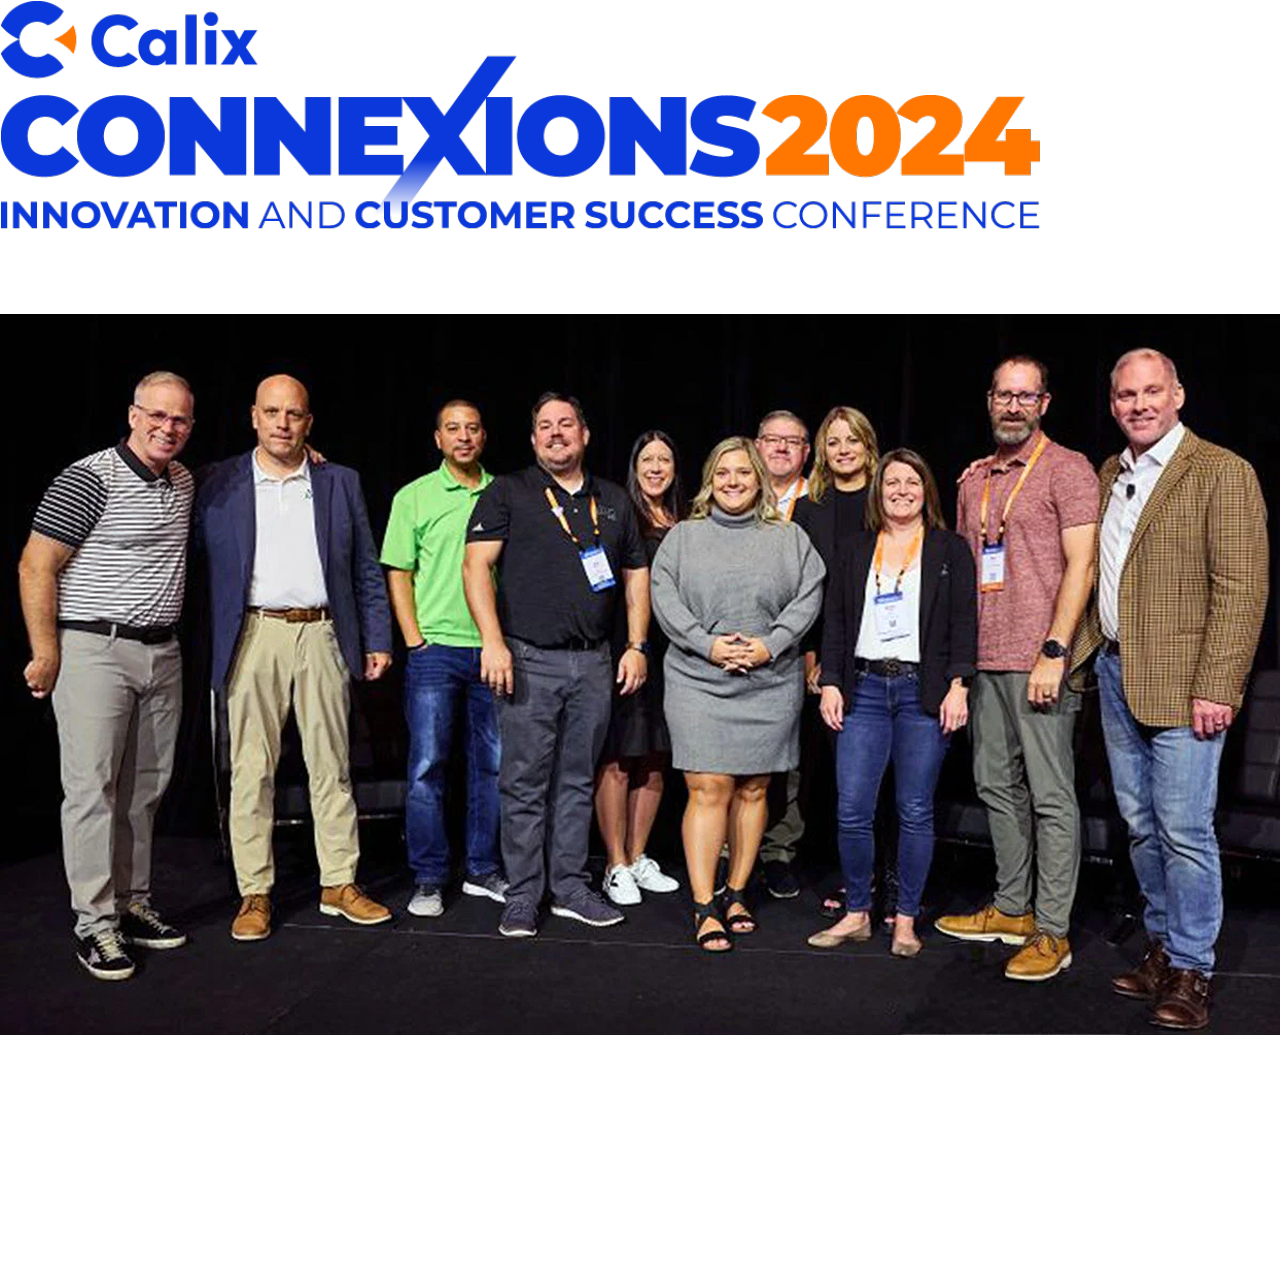 Experts at ConneXions event